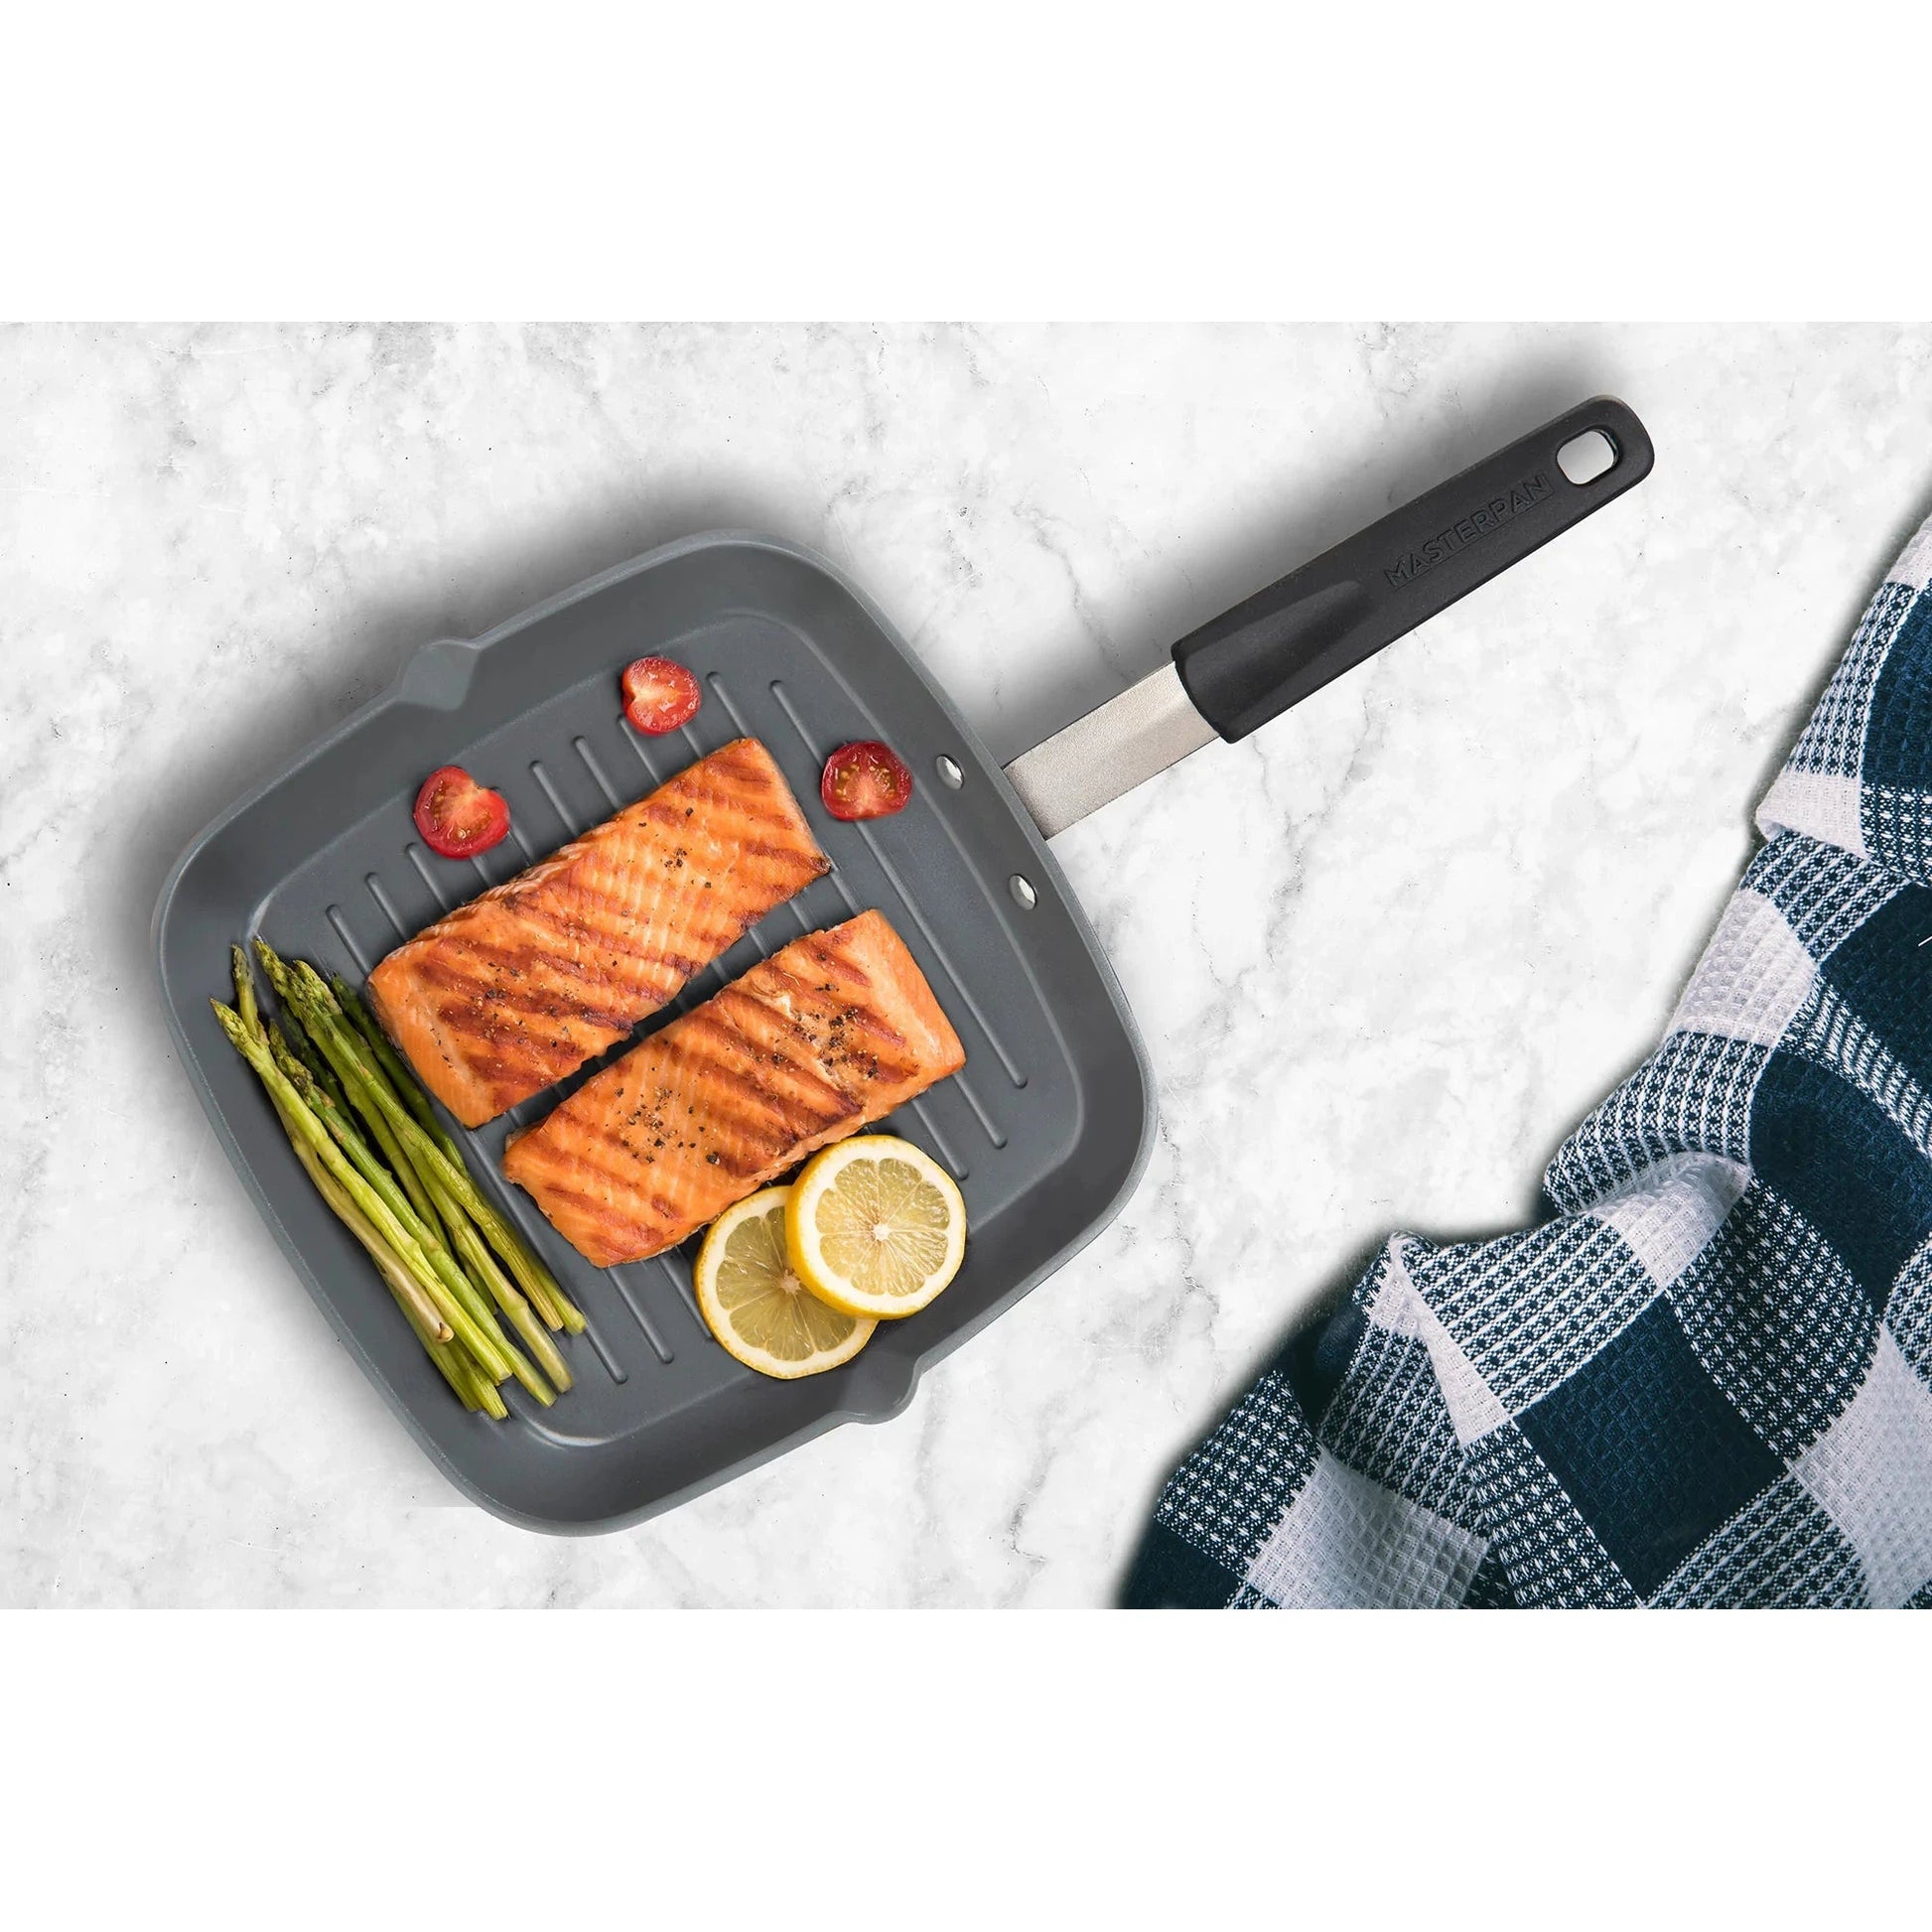 MASTERPAN Chef's Series 10” Grill Pan, Non-stick Aluminum Cookware With Stainless Steel Chef’s Handle